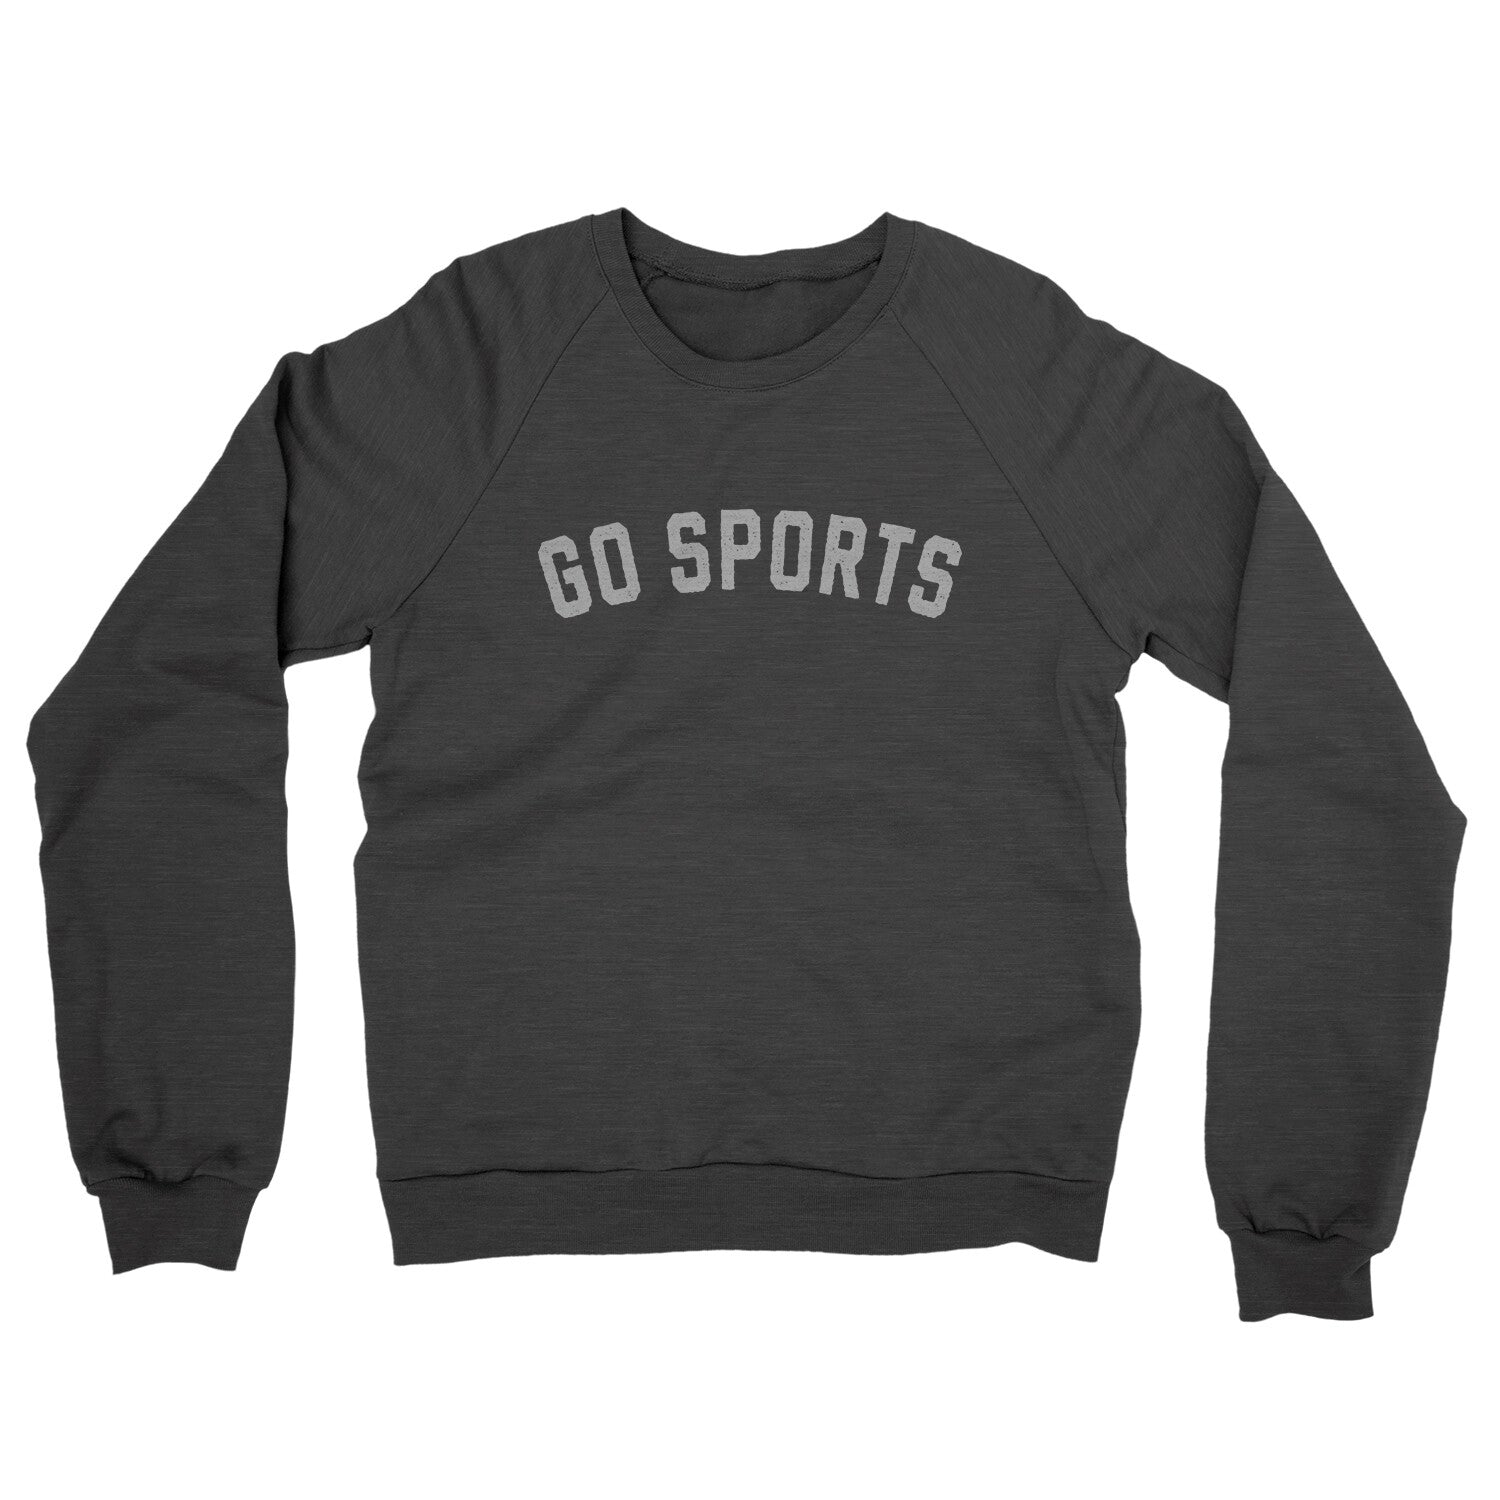 Go Sports in Charcoal Heather Color